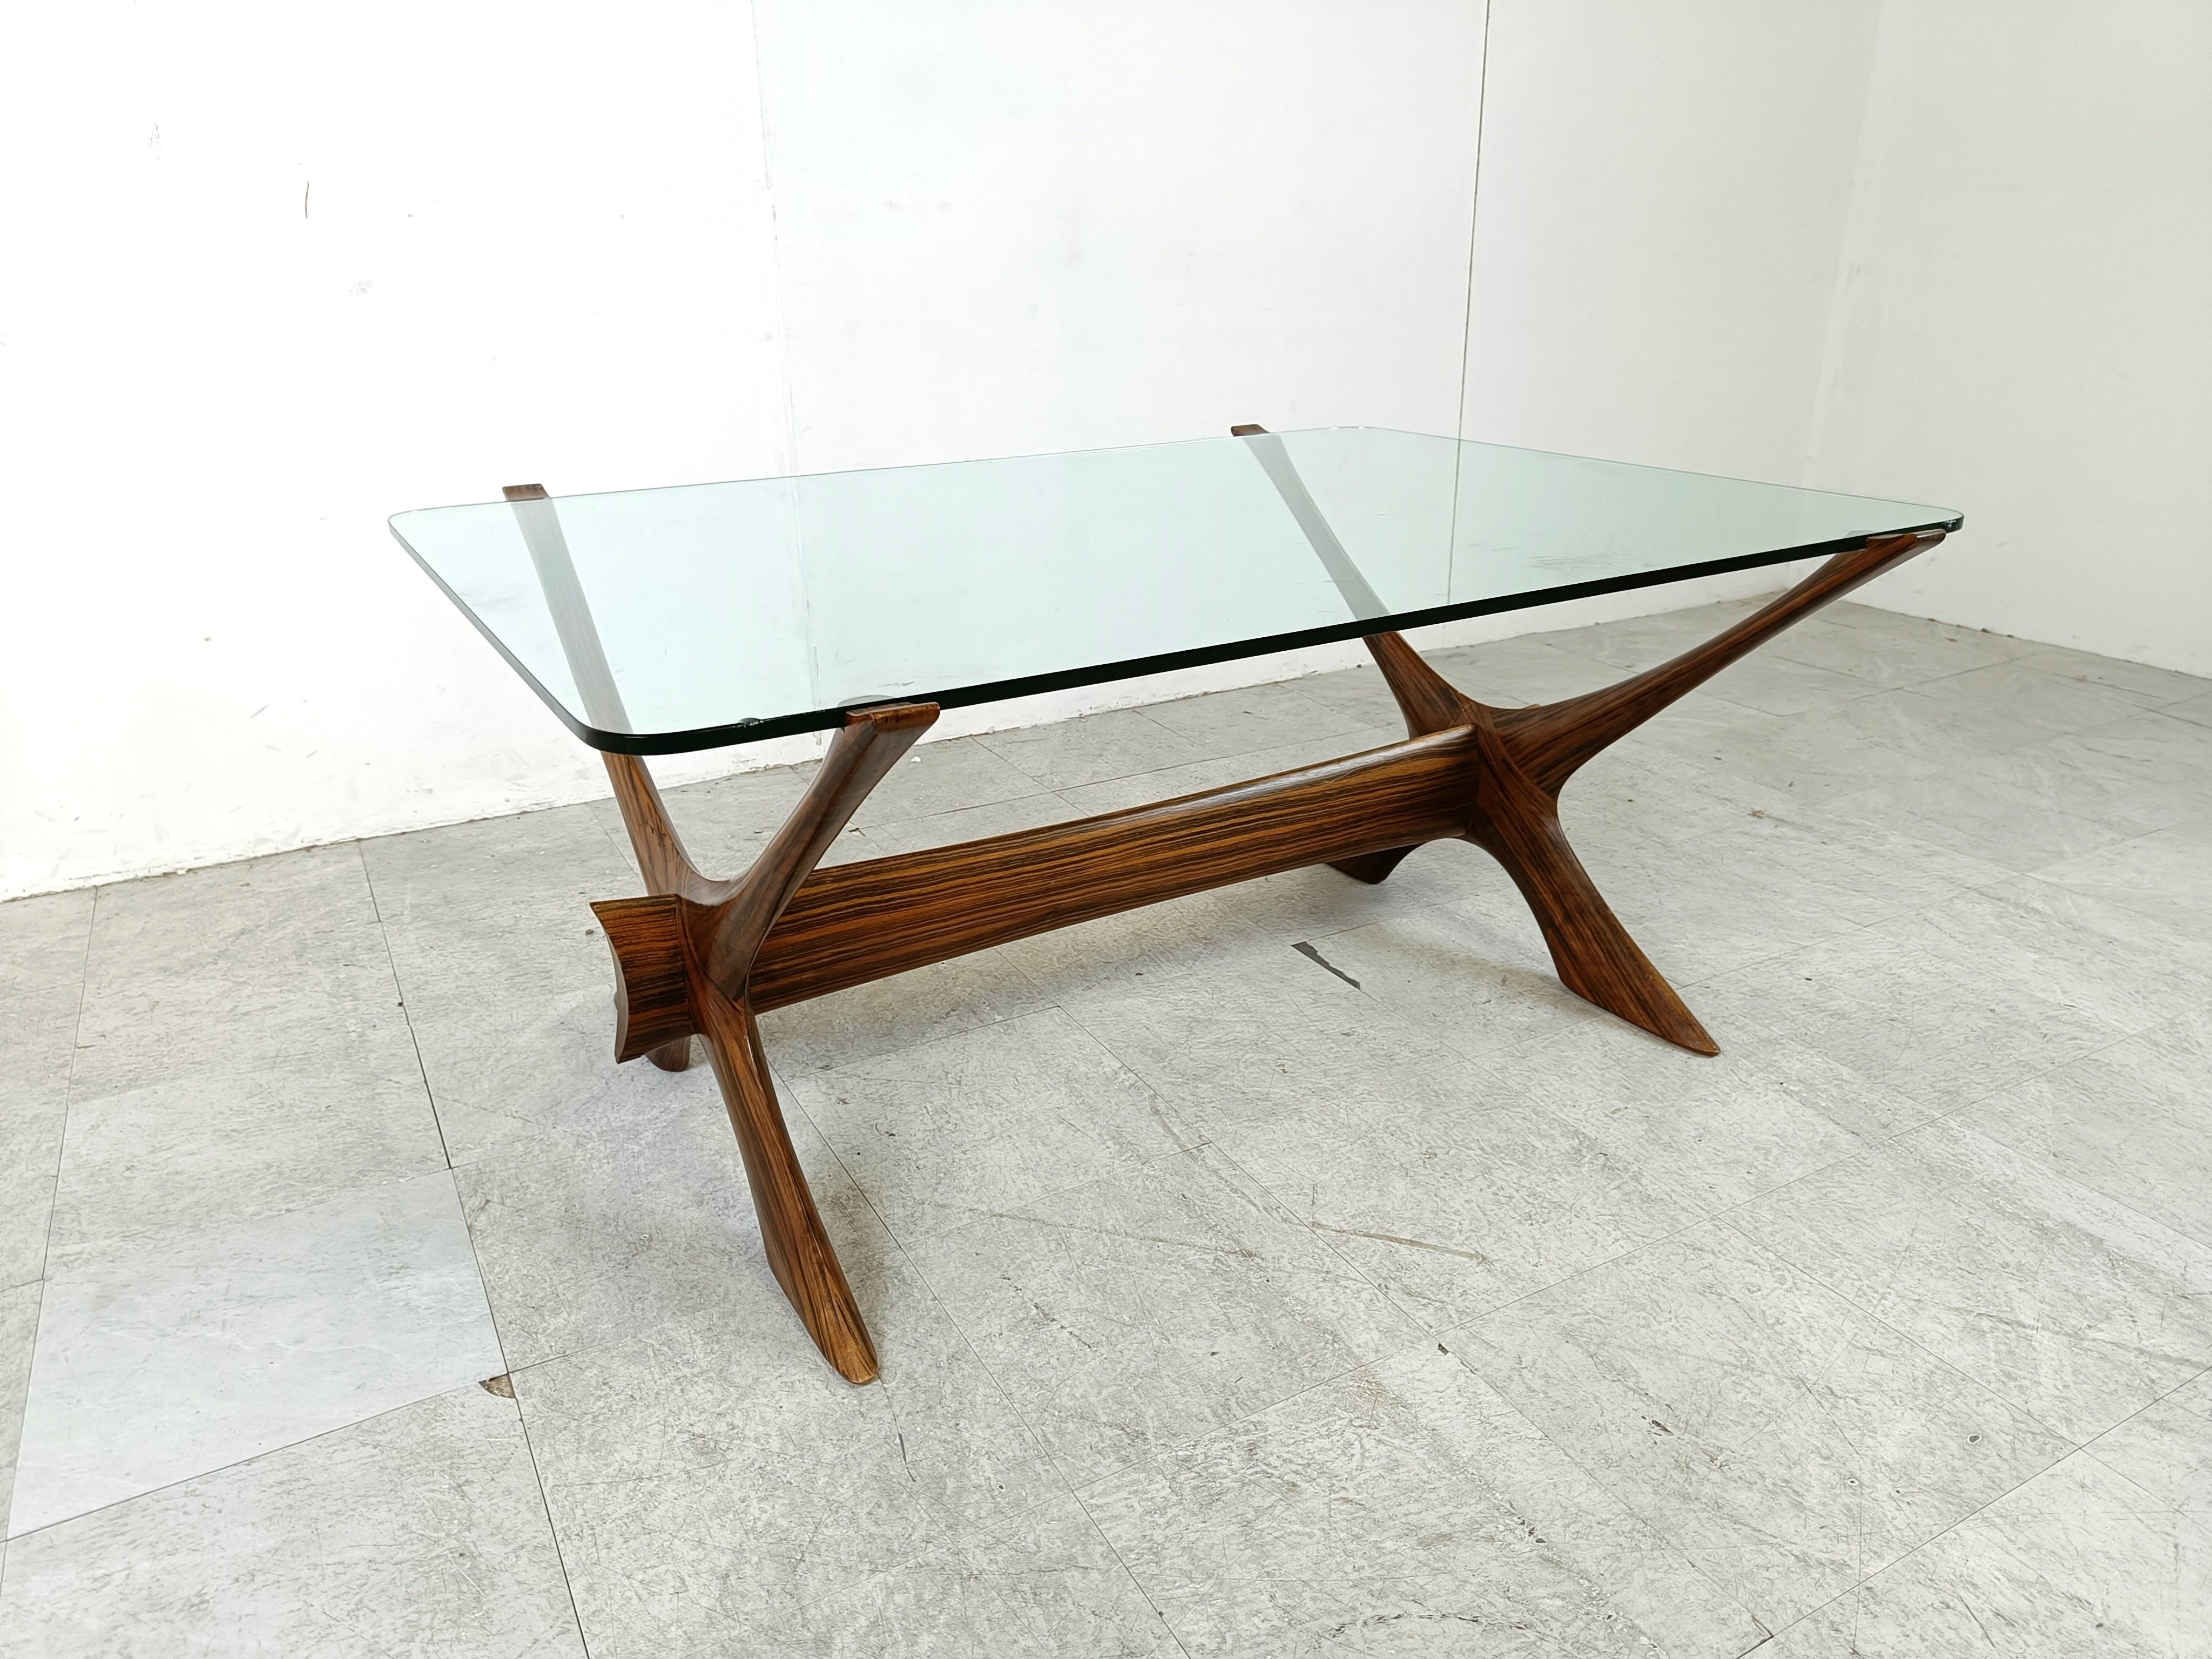 Condor Coffee Table by Fredrik Schriever-Abeln, Sweden, 1960s For Sale 1